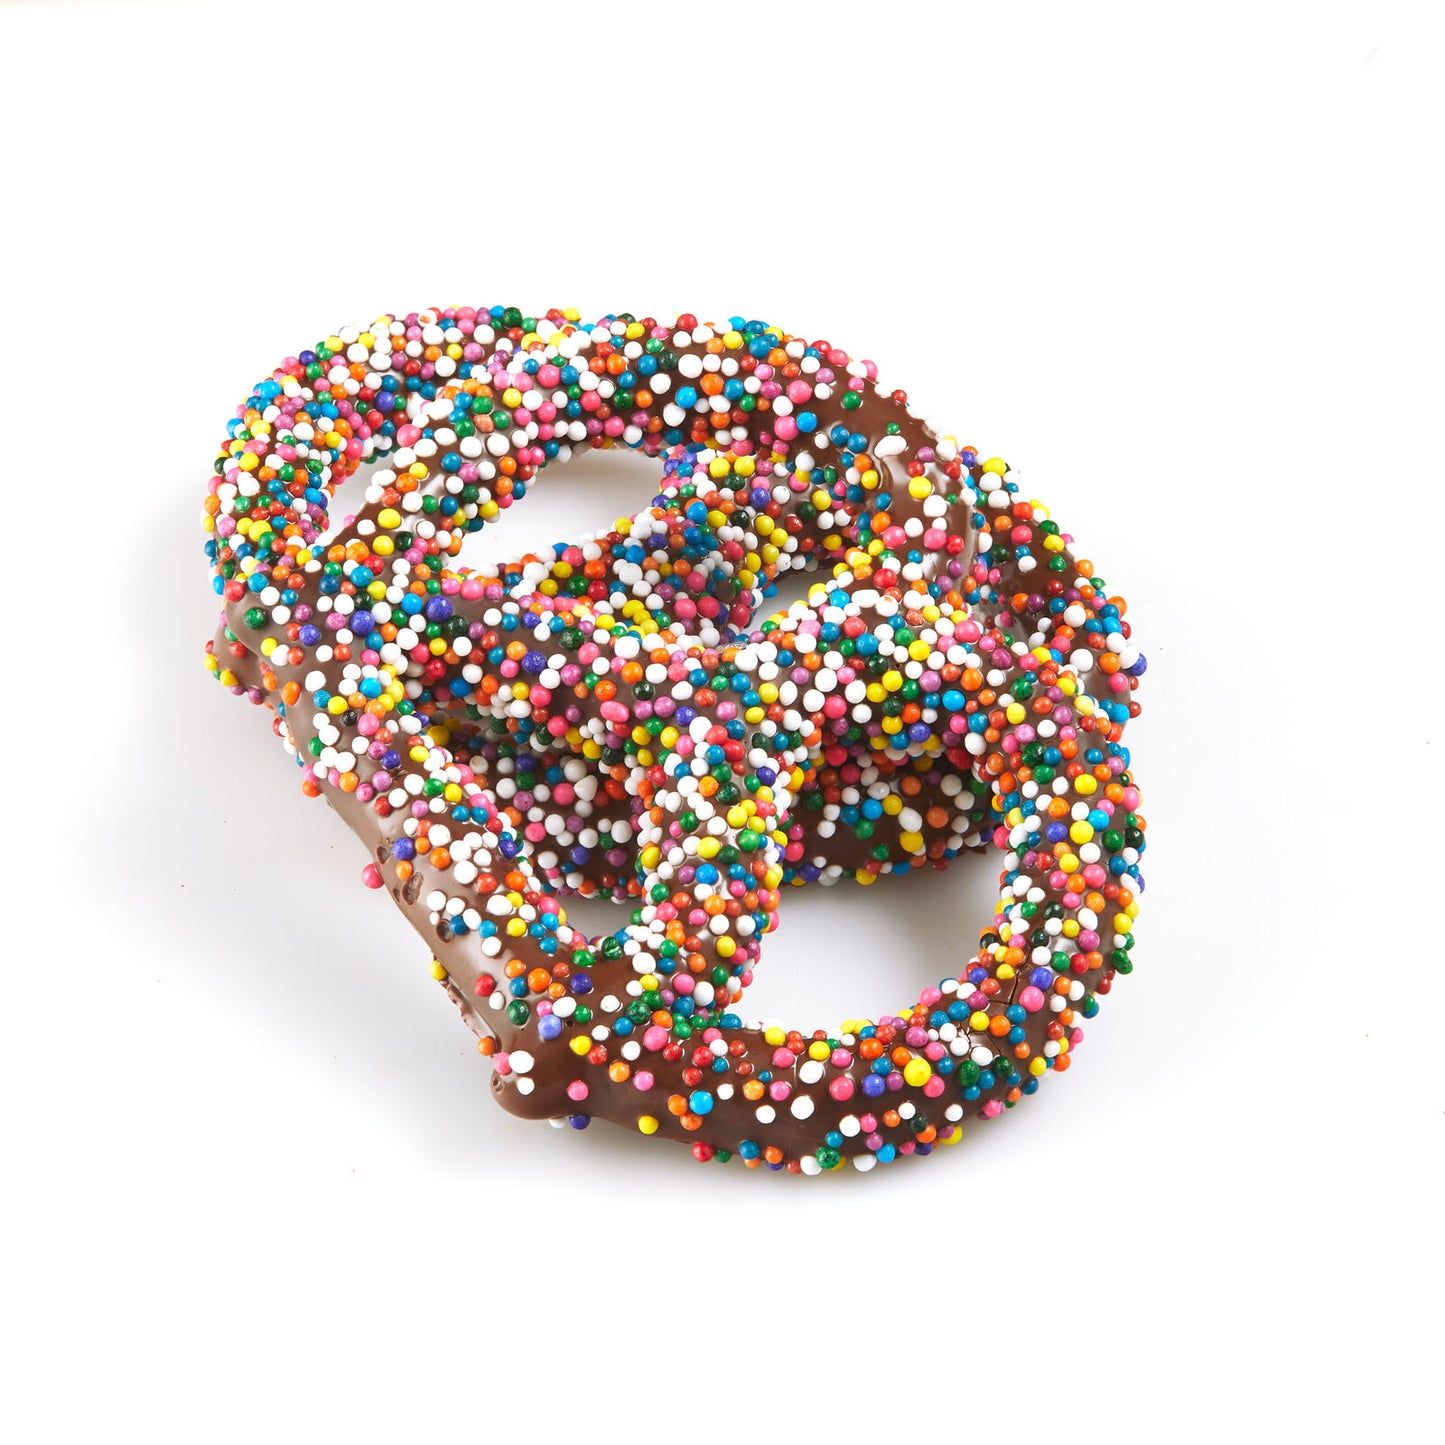 Colored Sprinkle Dipped Pretzels